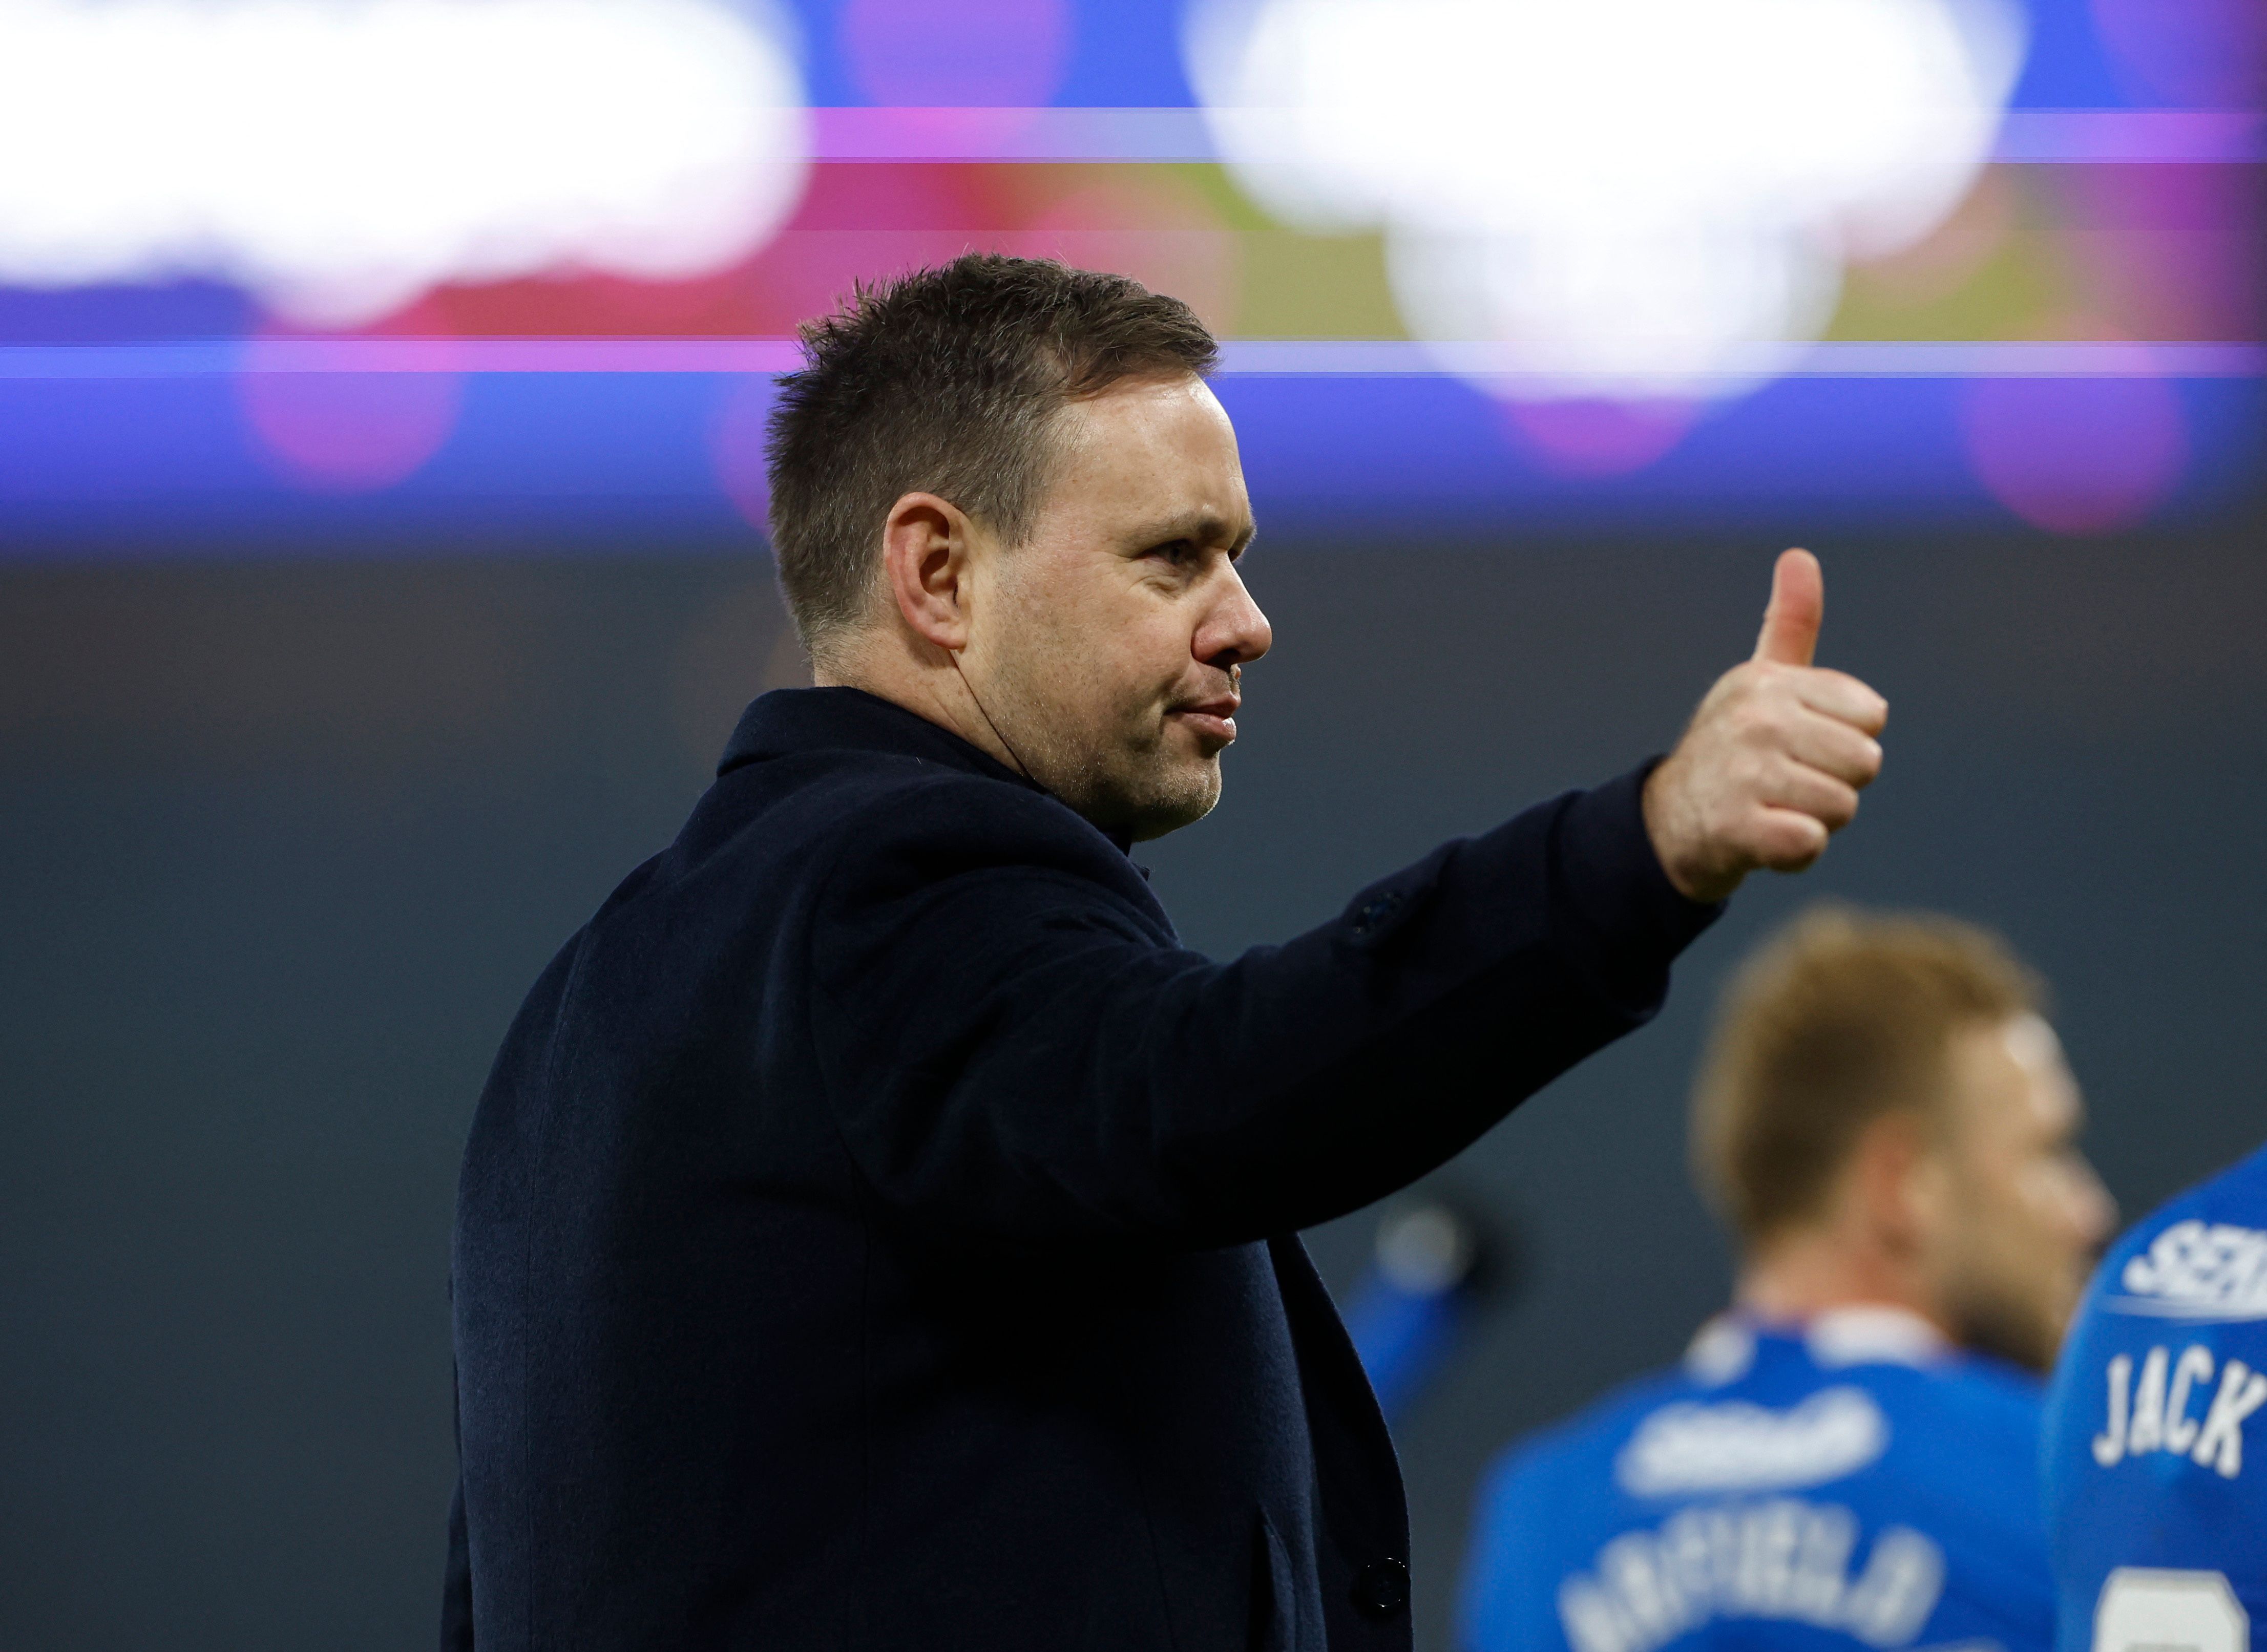 Rangers manager Michael Beale giving thumbs up after win